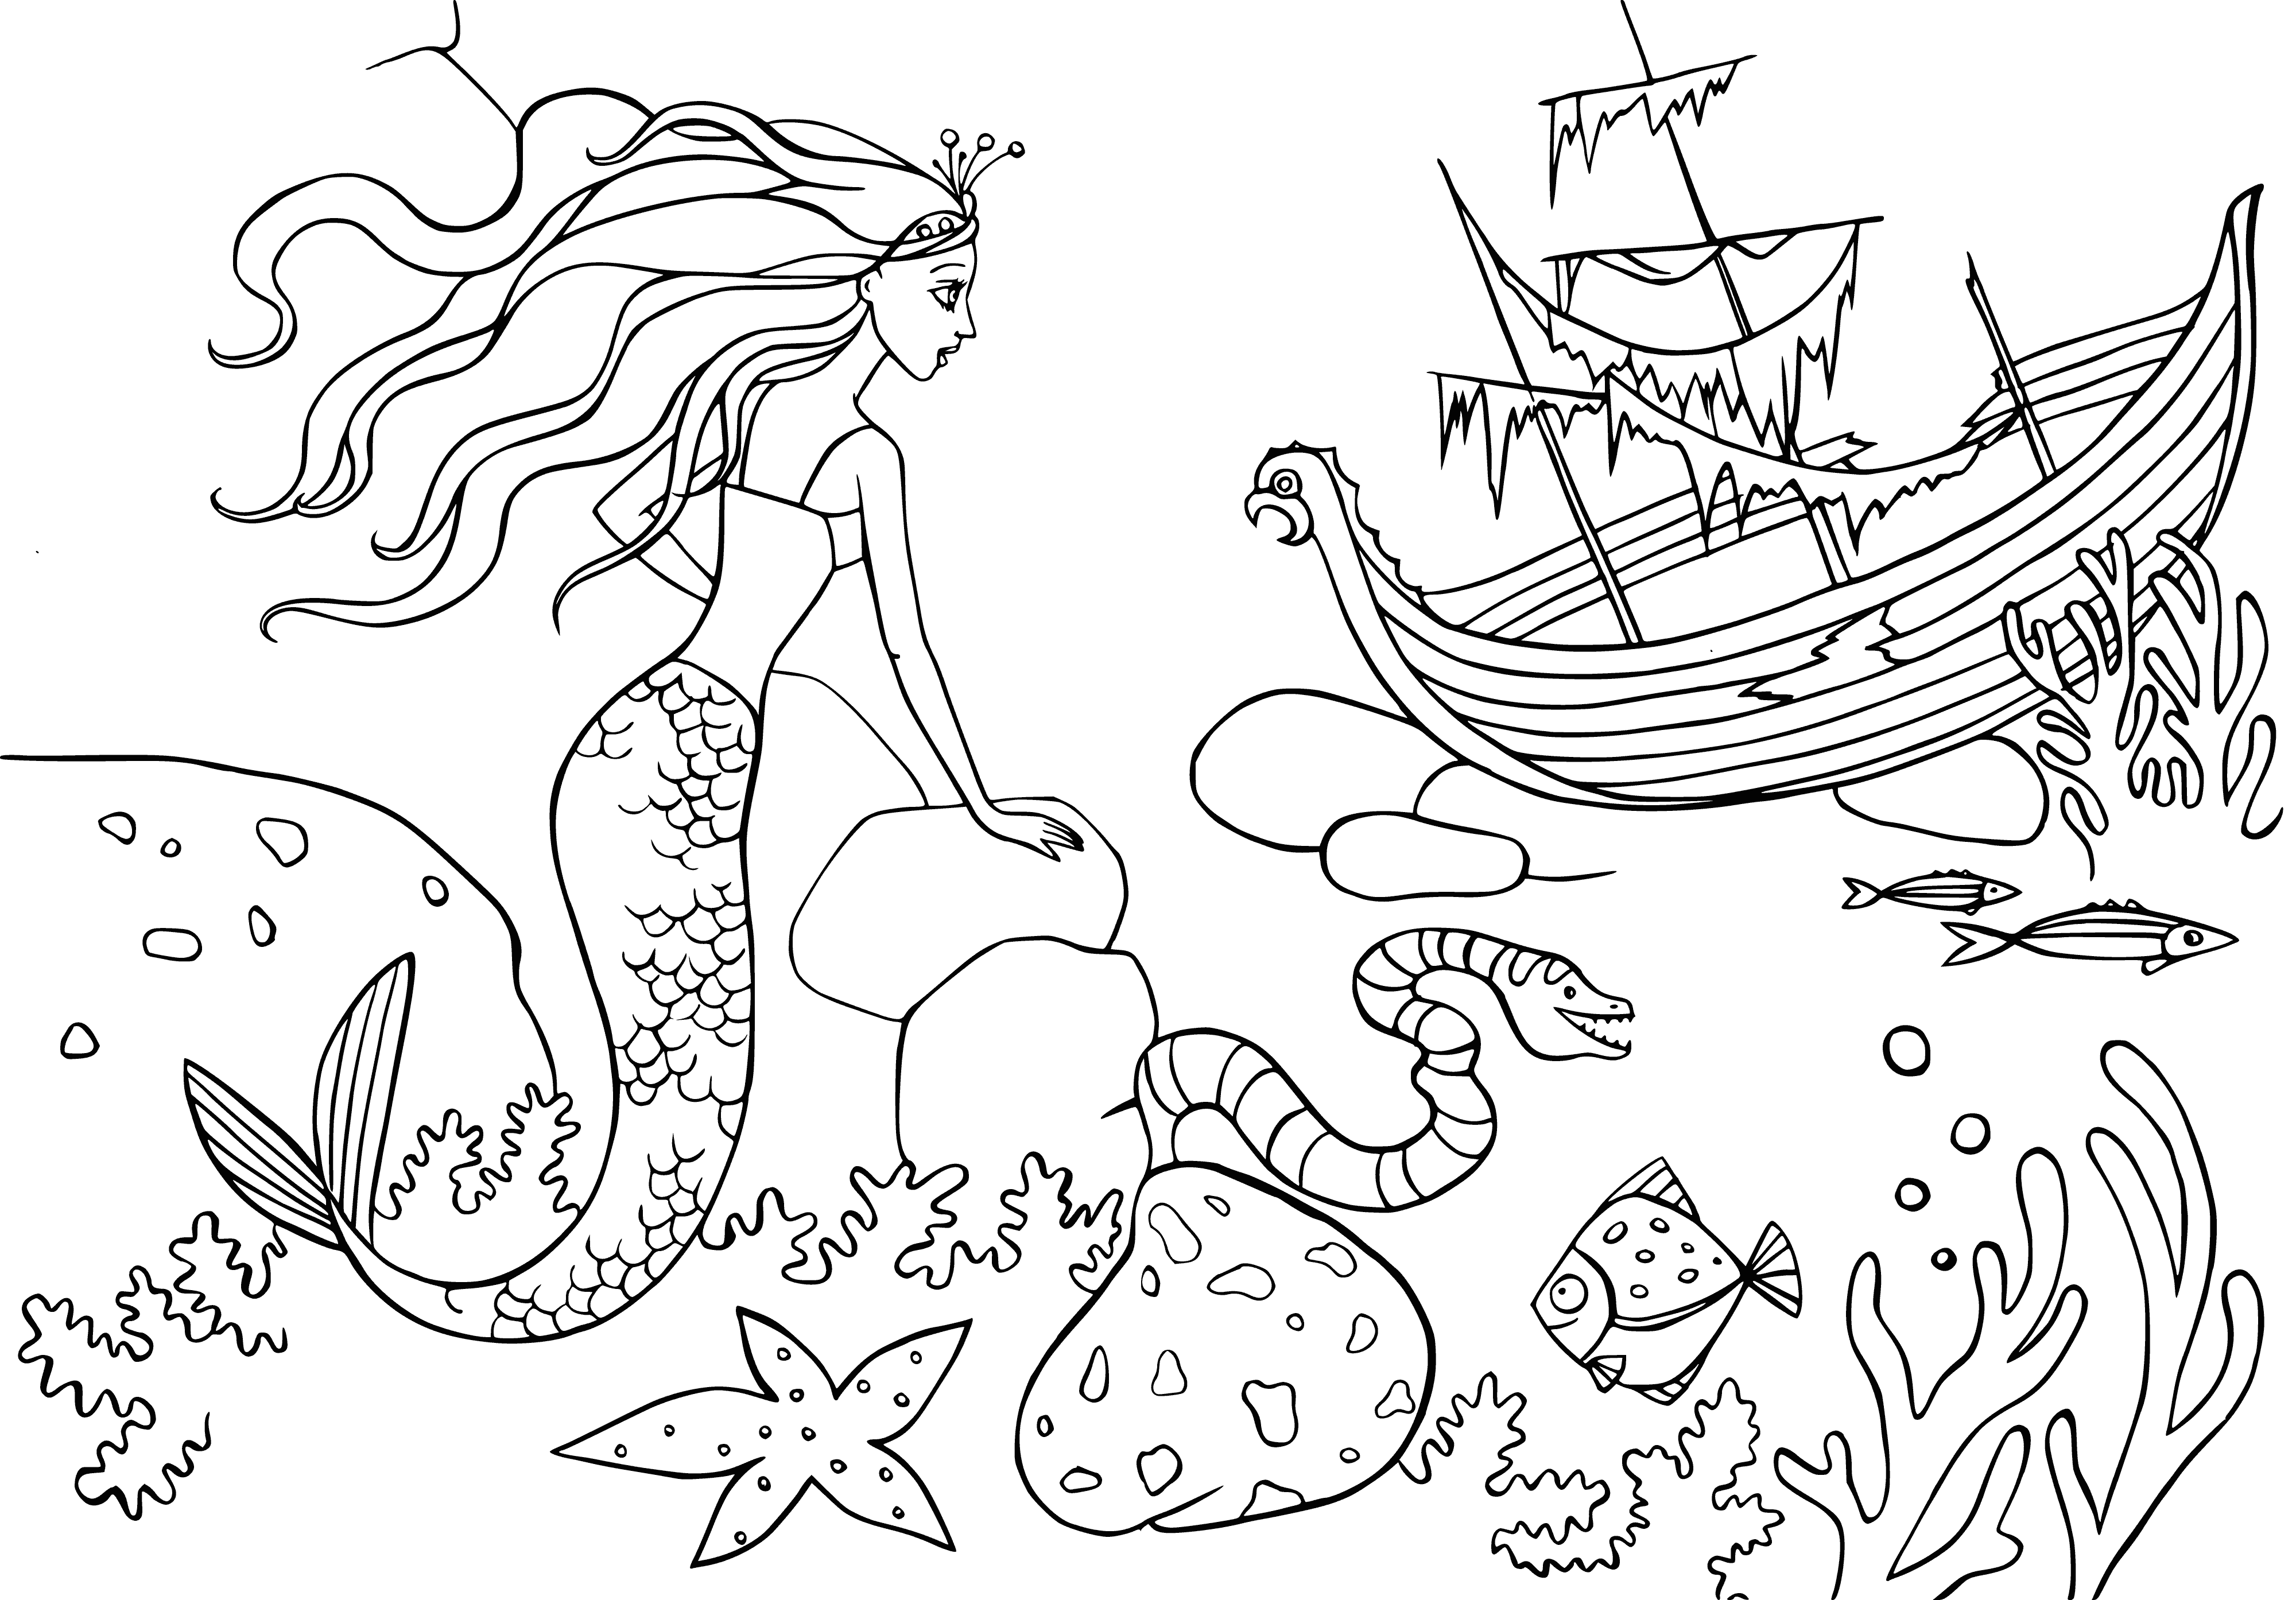 coloring page: Peaceful kingdom of colorful rocks and flowers surrounding a majestic castle.